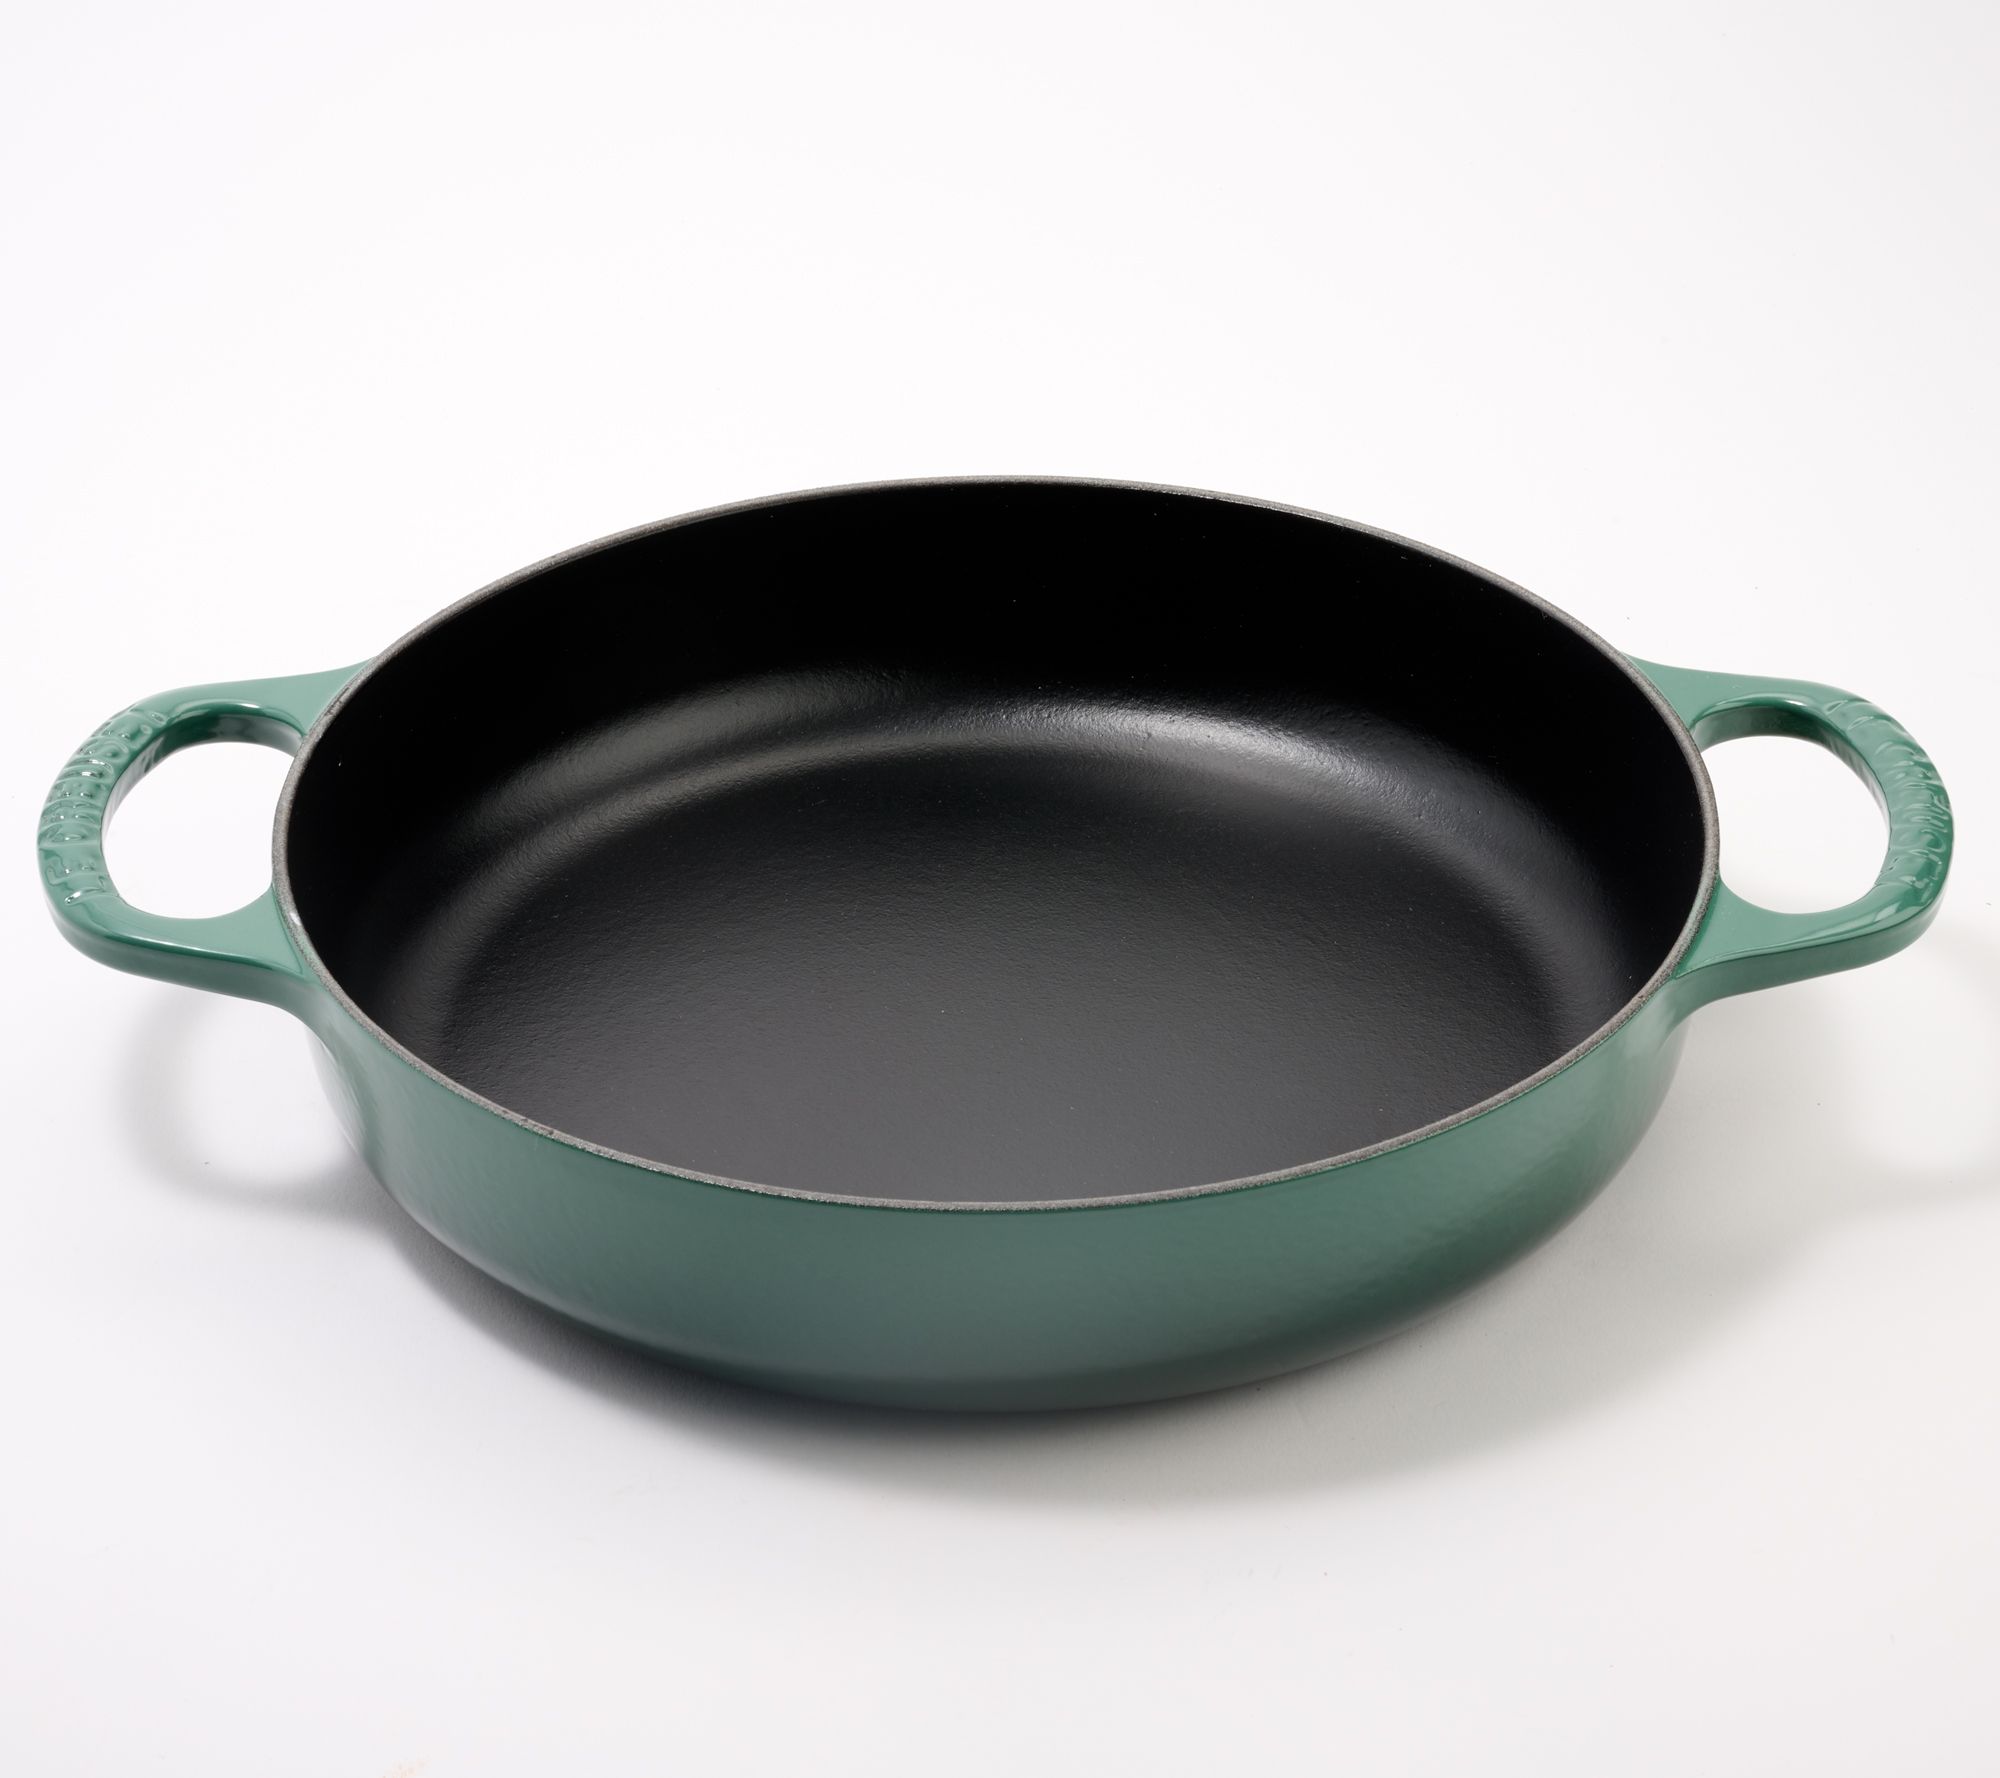 Le Creuset 15.75 Cast Iron Oval Skillet & Silicone Sleeve on QVC 